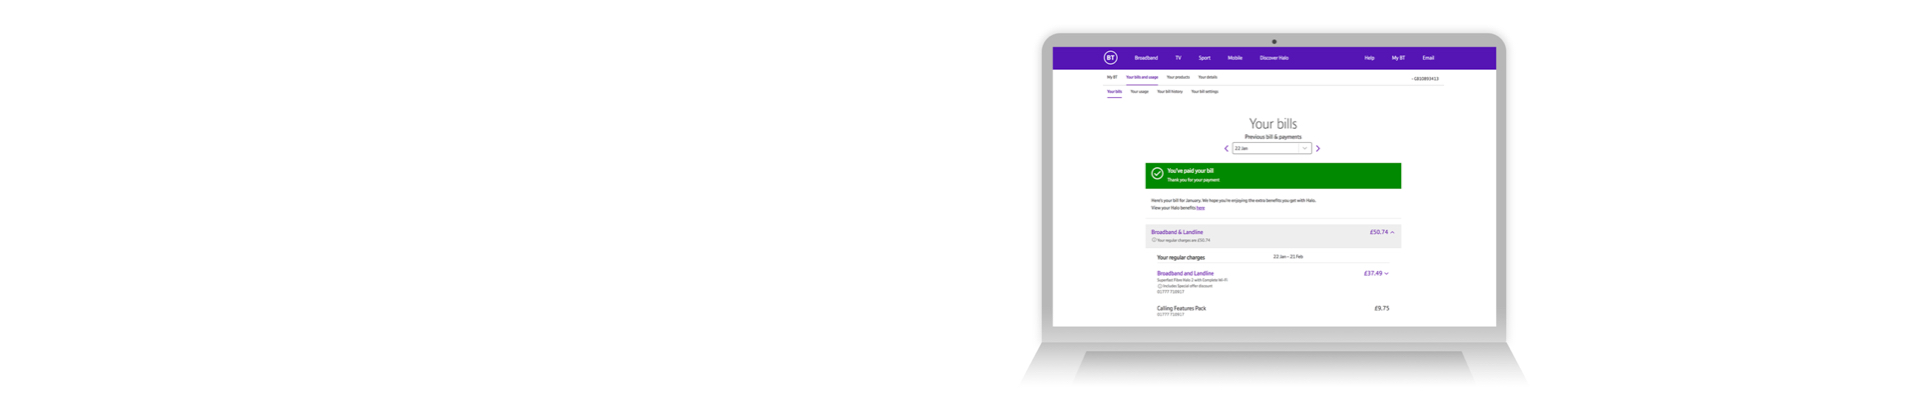 View your bills and manage your account with BT